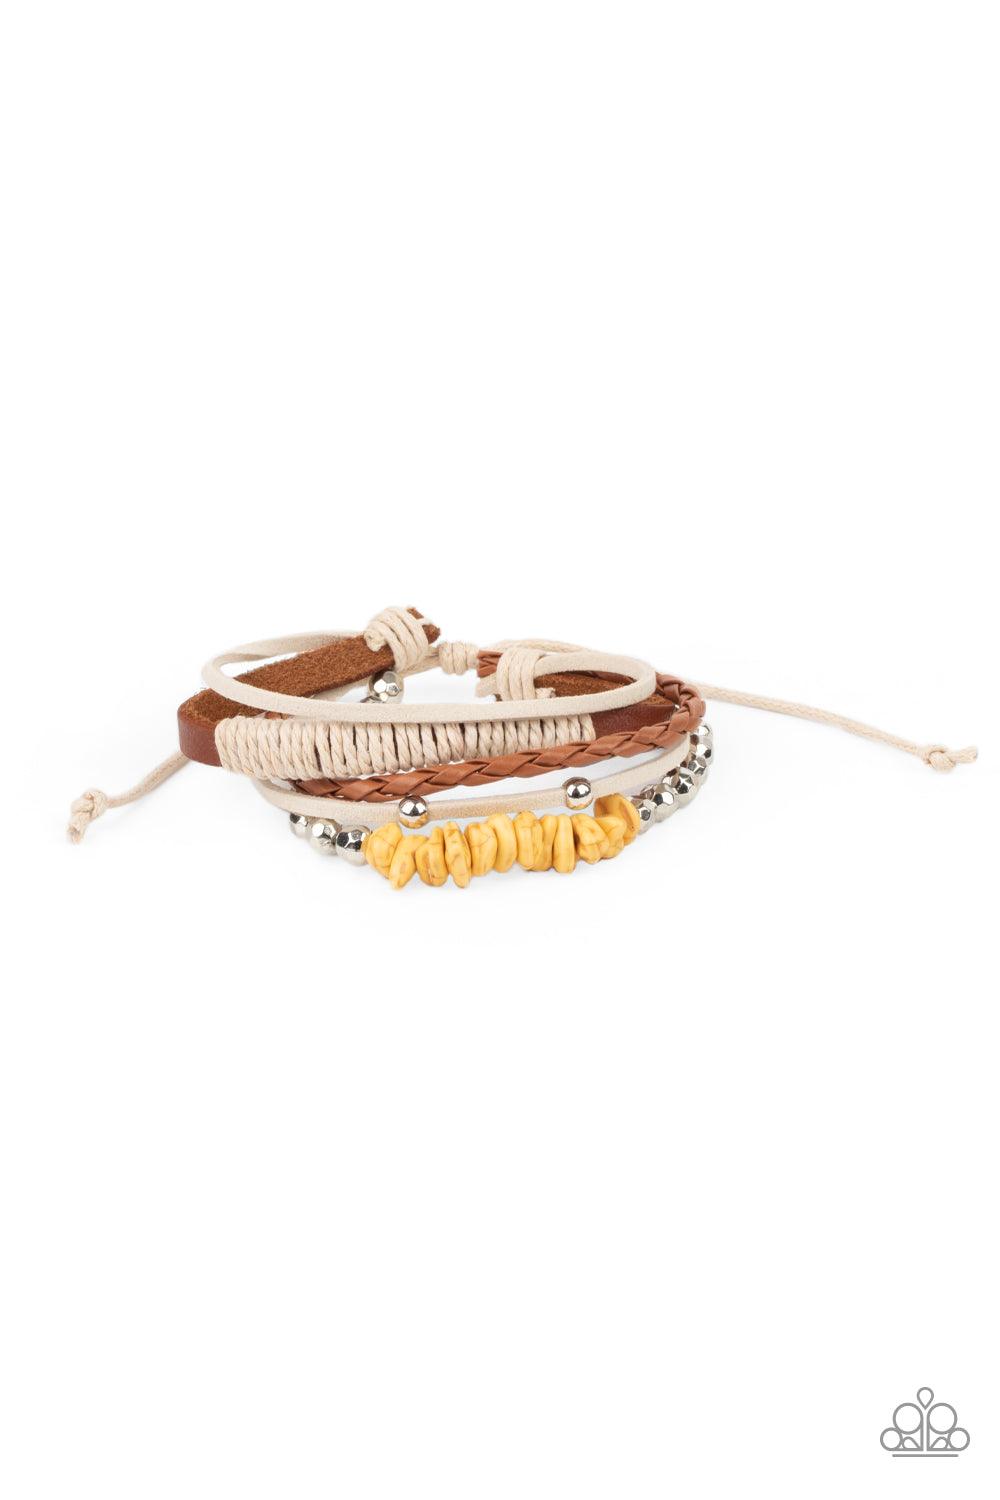 Paparazzi Accessories Keep At ROAM Temperature - Yellow A strand of yellow pebbles and faceted silver beads joins rustic suede and leather bands around the wrist, creating earthy layers. Features an adjustable sliding knot closure. Sold as one individual